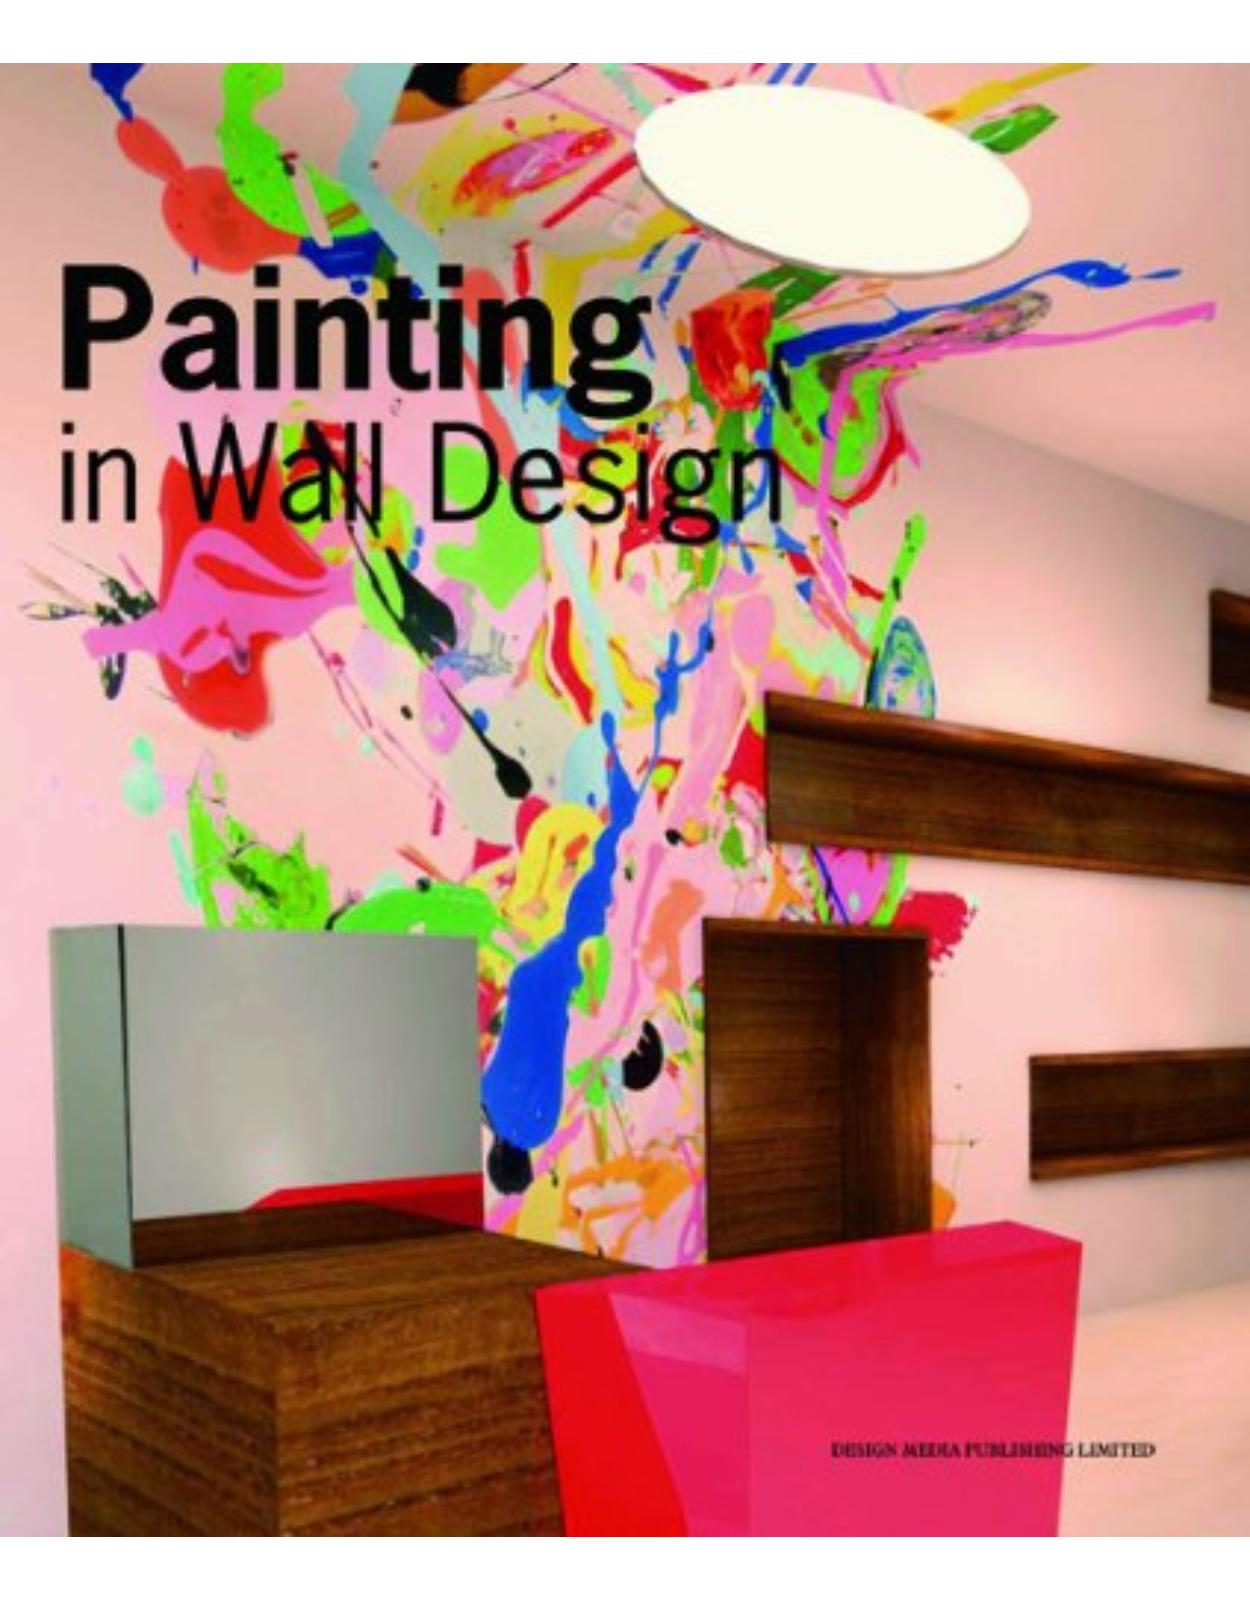 Painting in Wall Design